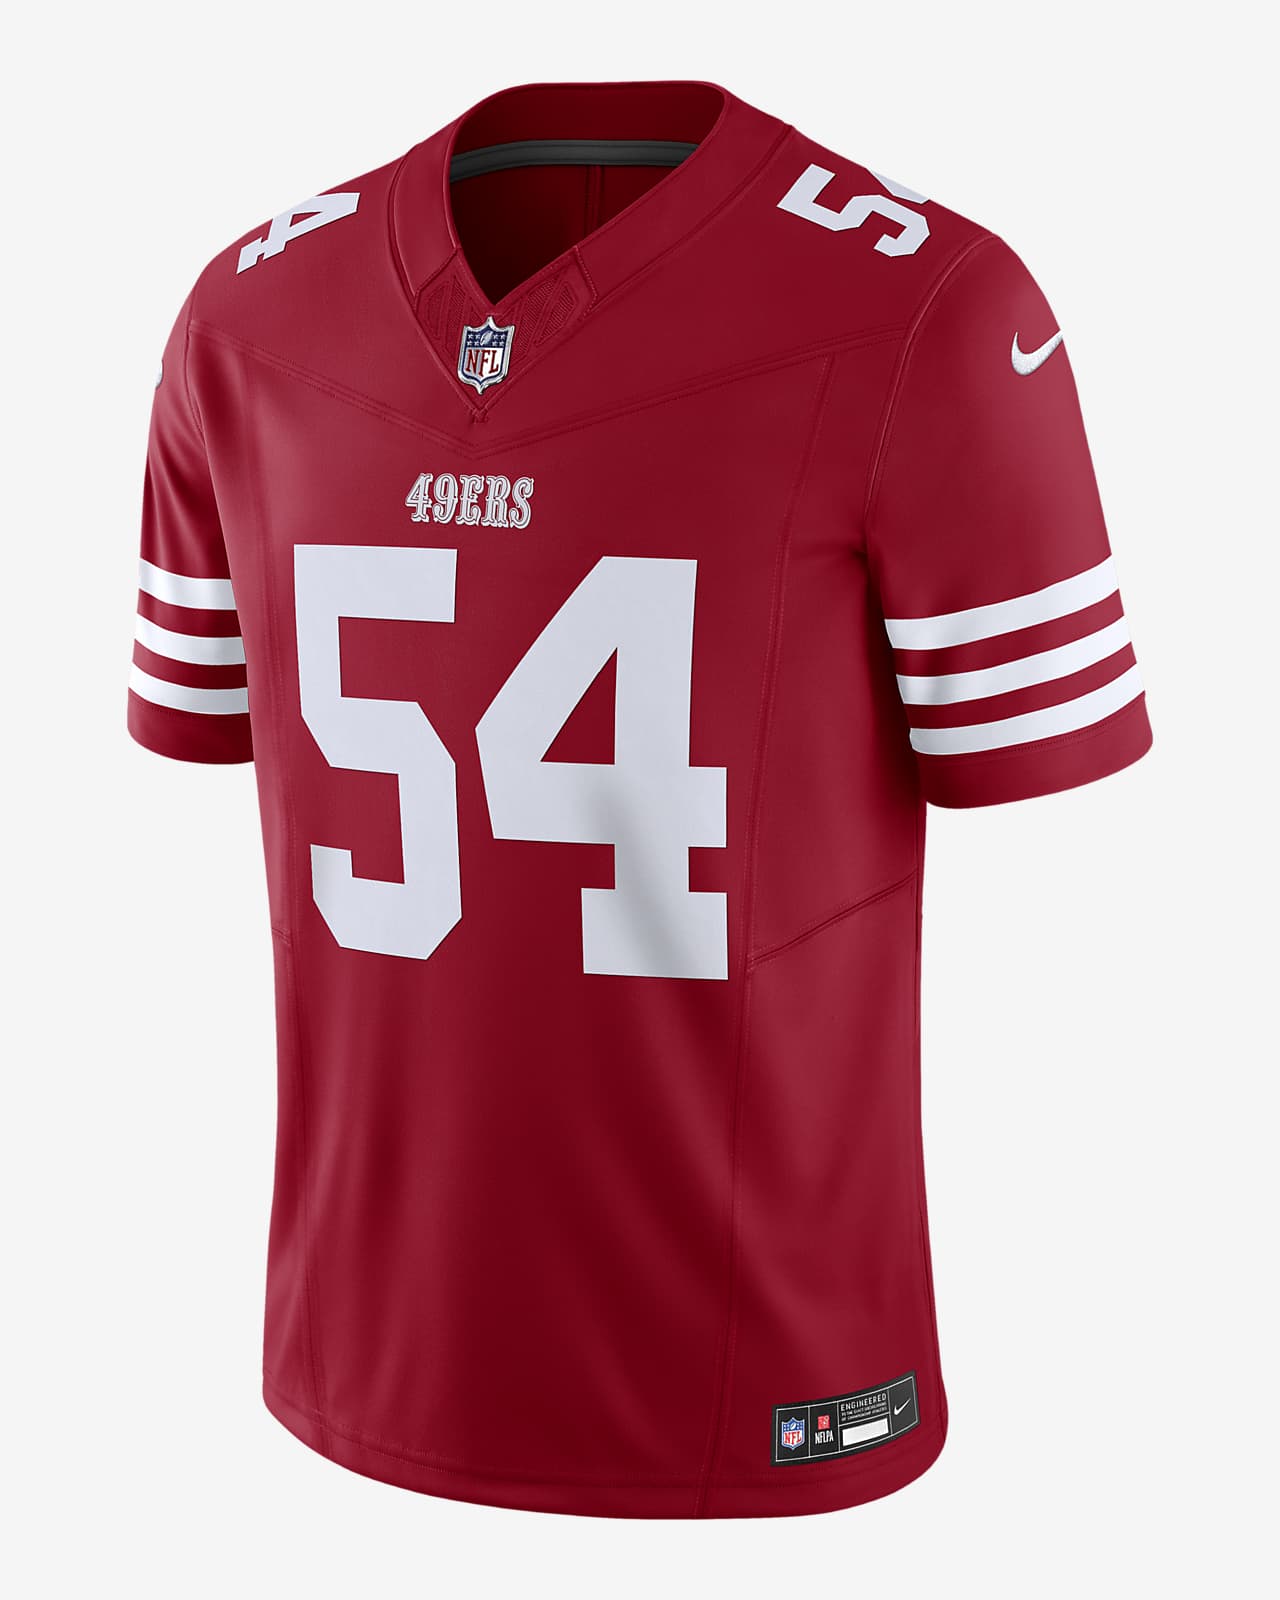 49ers jersey 54